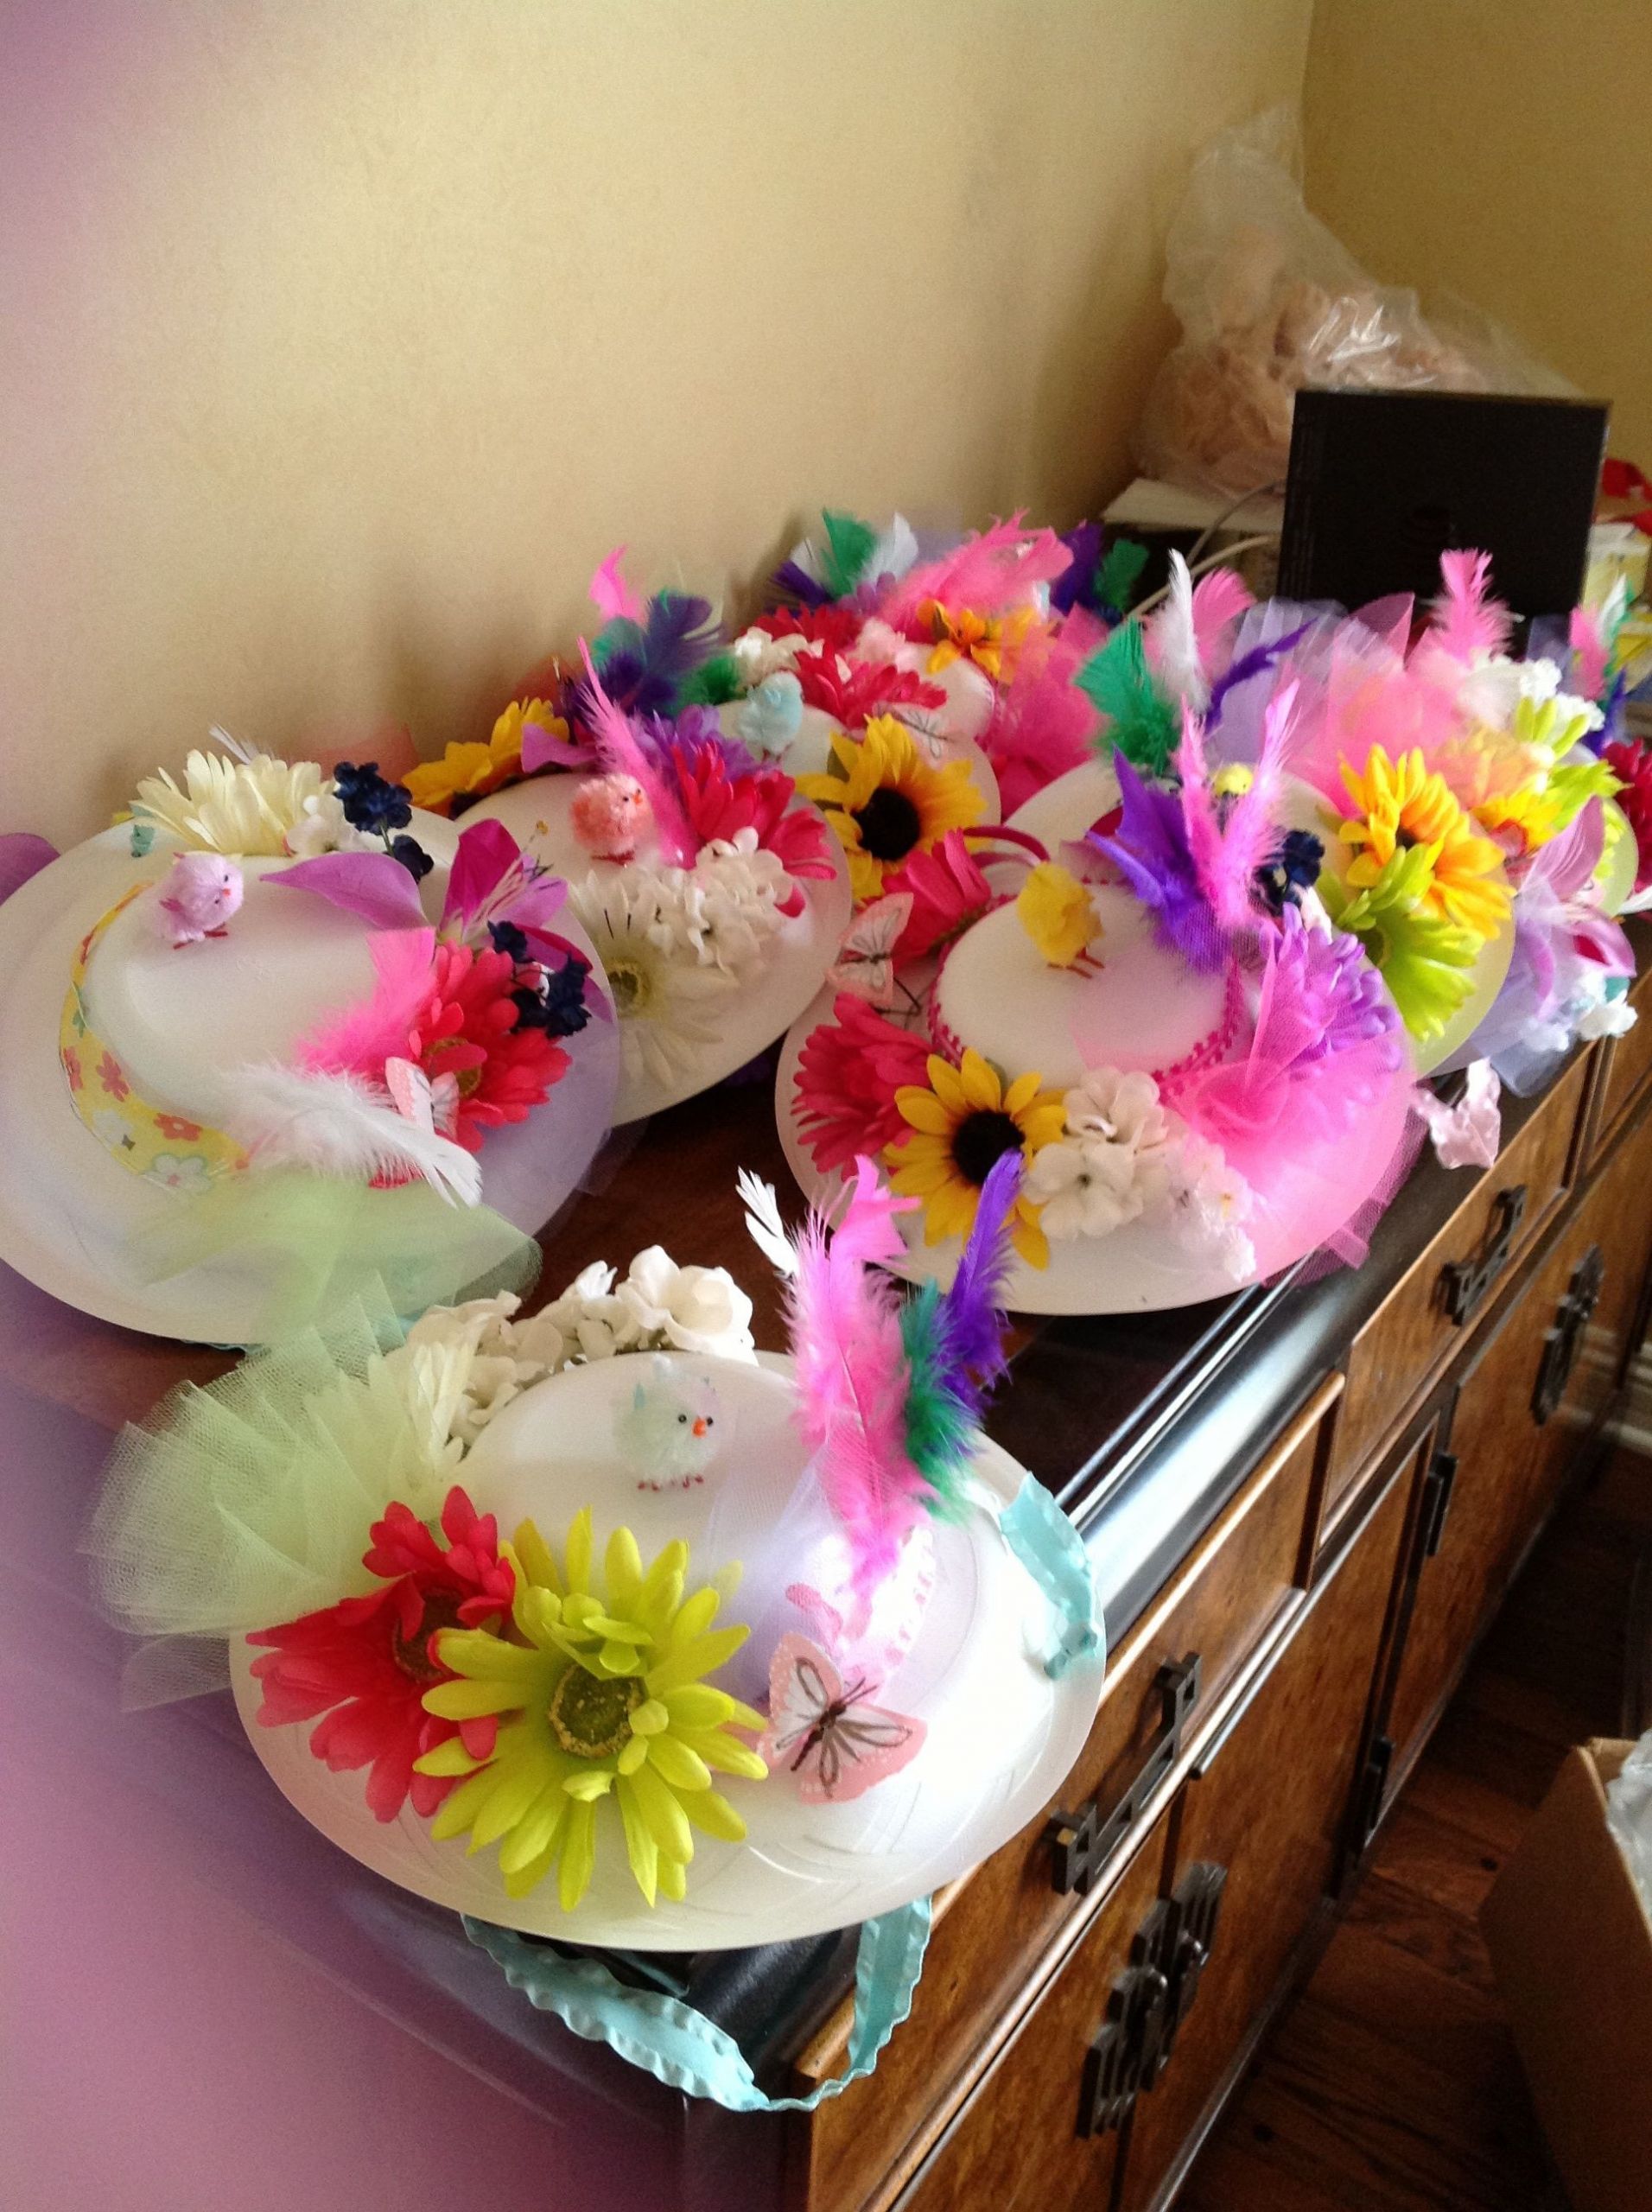 Hat Decorating Ideas Tea Party
 I had my troop make tea party hats from Dixie plates for a